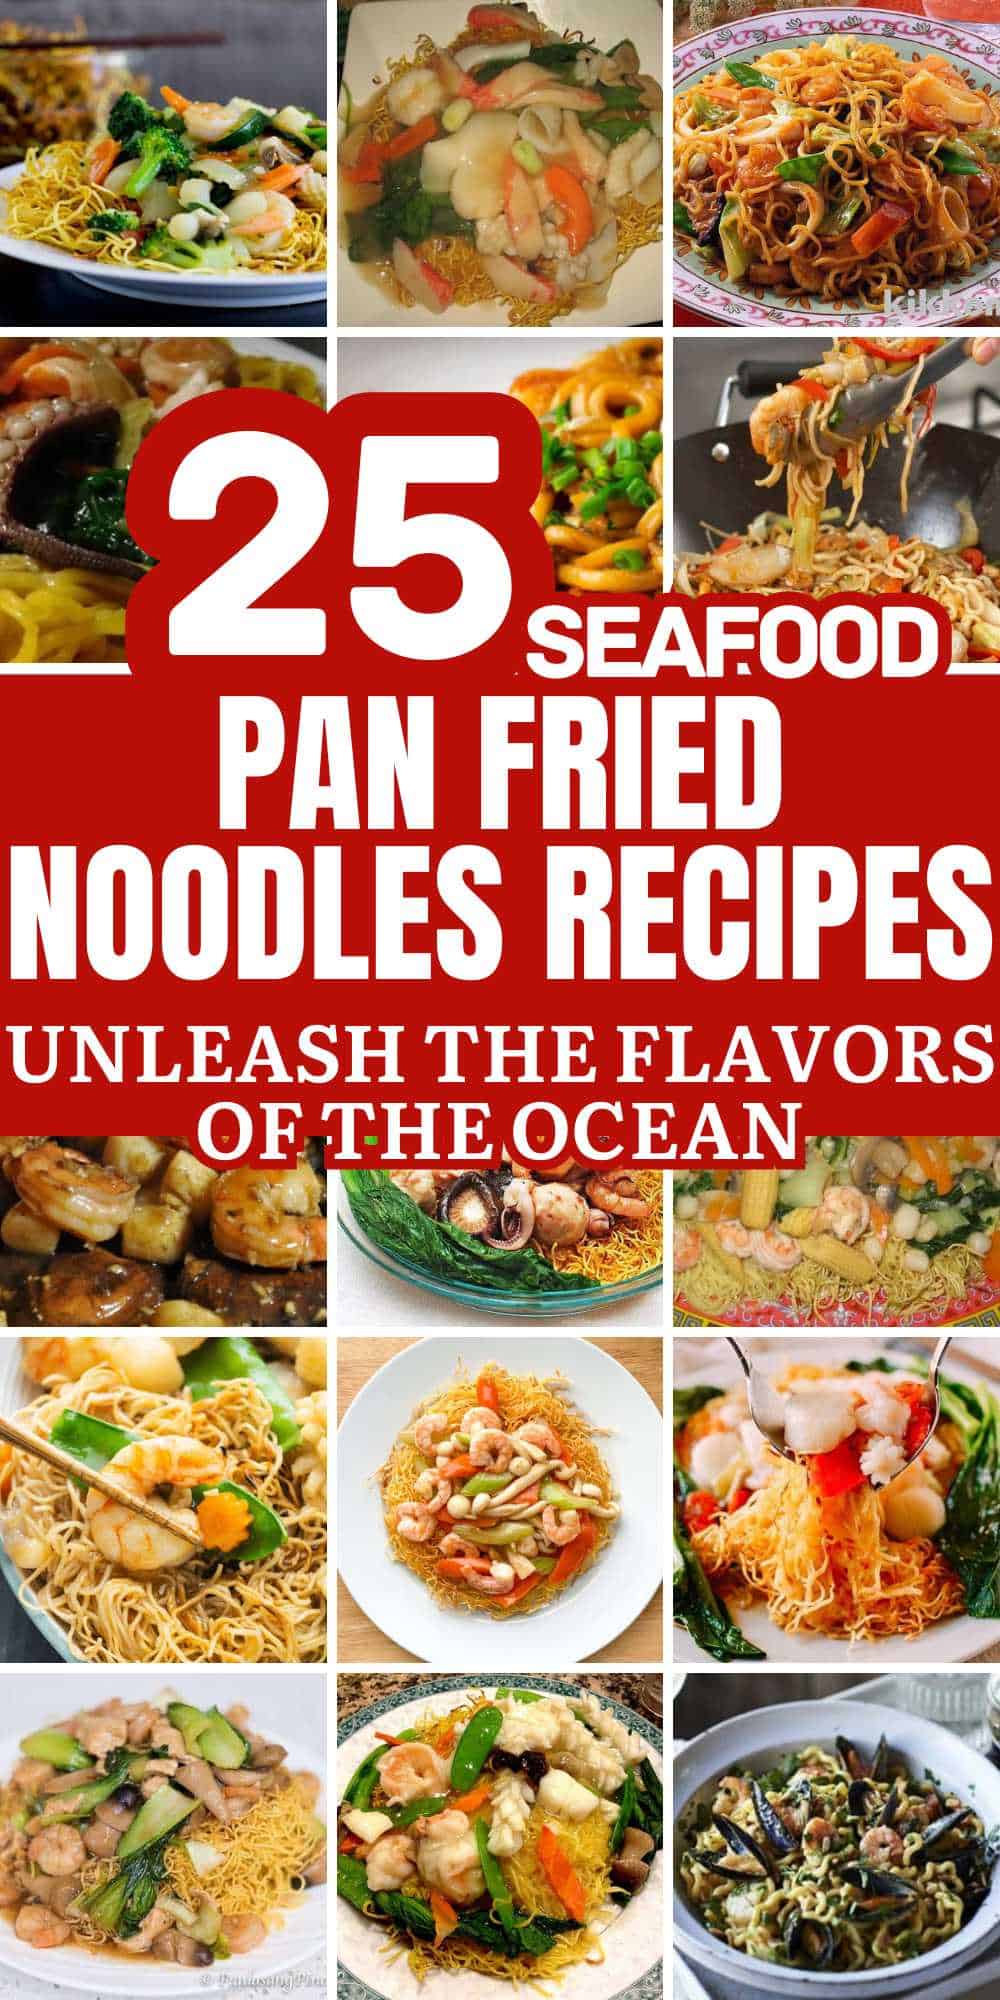 Seafood Pan Fried Noodles Recipes